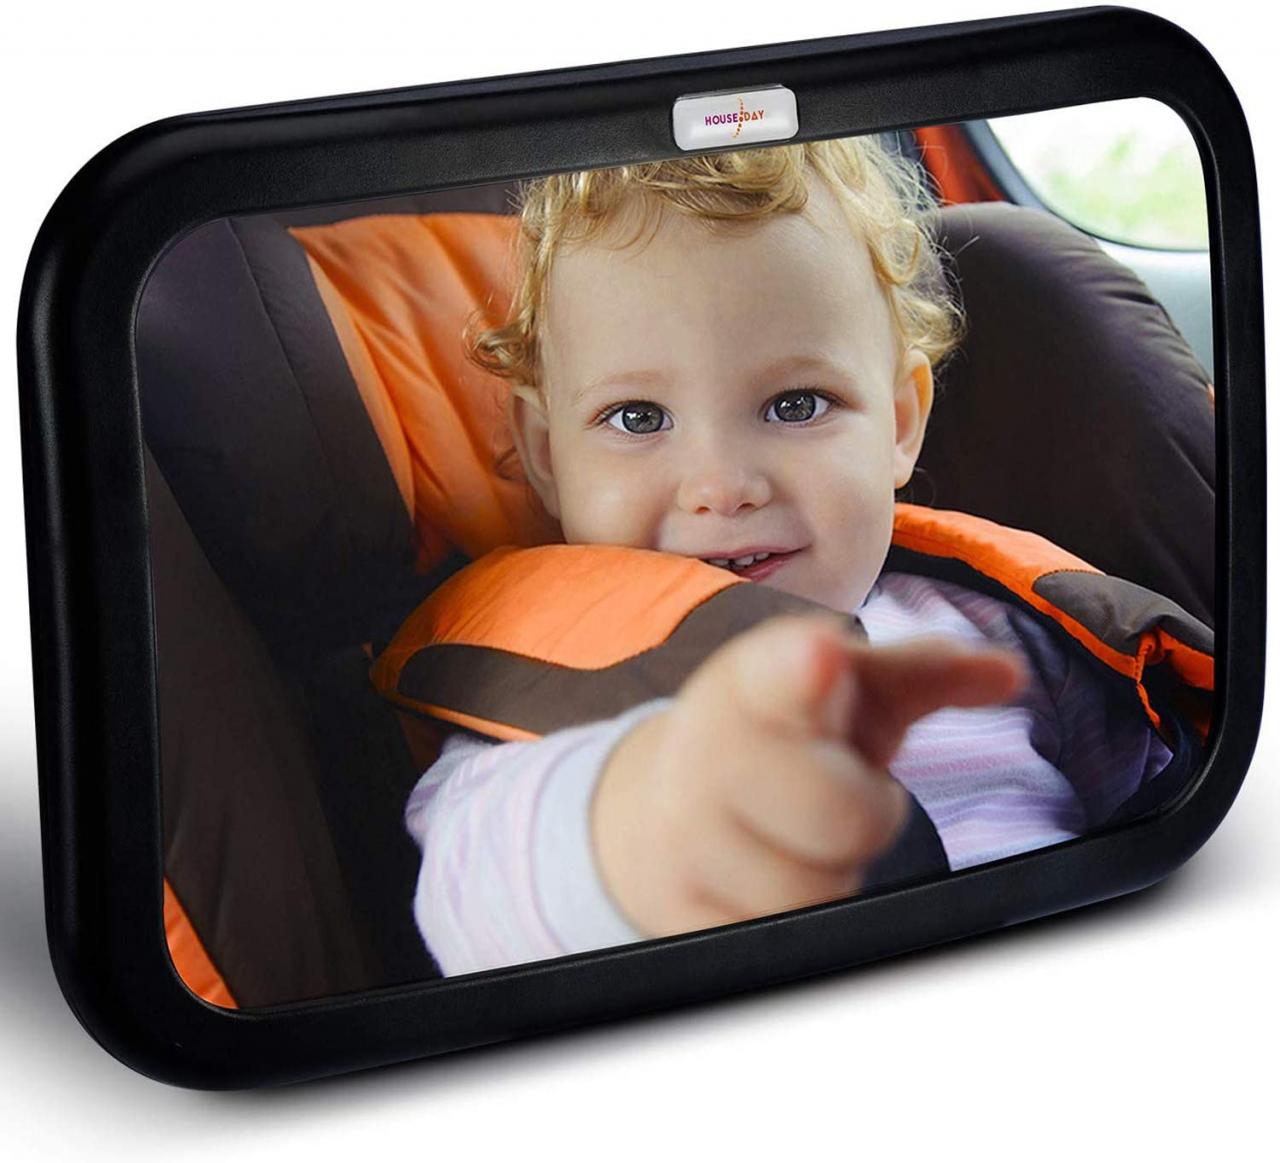 Buy HOUSEDAY Baby Car Mirror Stable Wide View Infant in Rear Facing Seat  Safety Shatterproof Crash Tested Car Seat Mirror Online in Vietnam.  B07Z5LL455